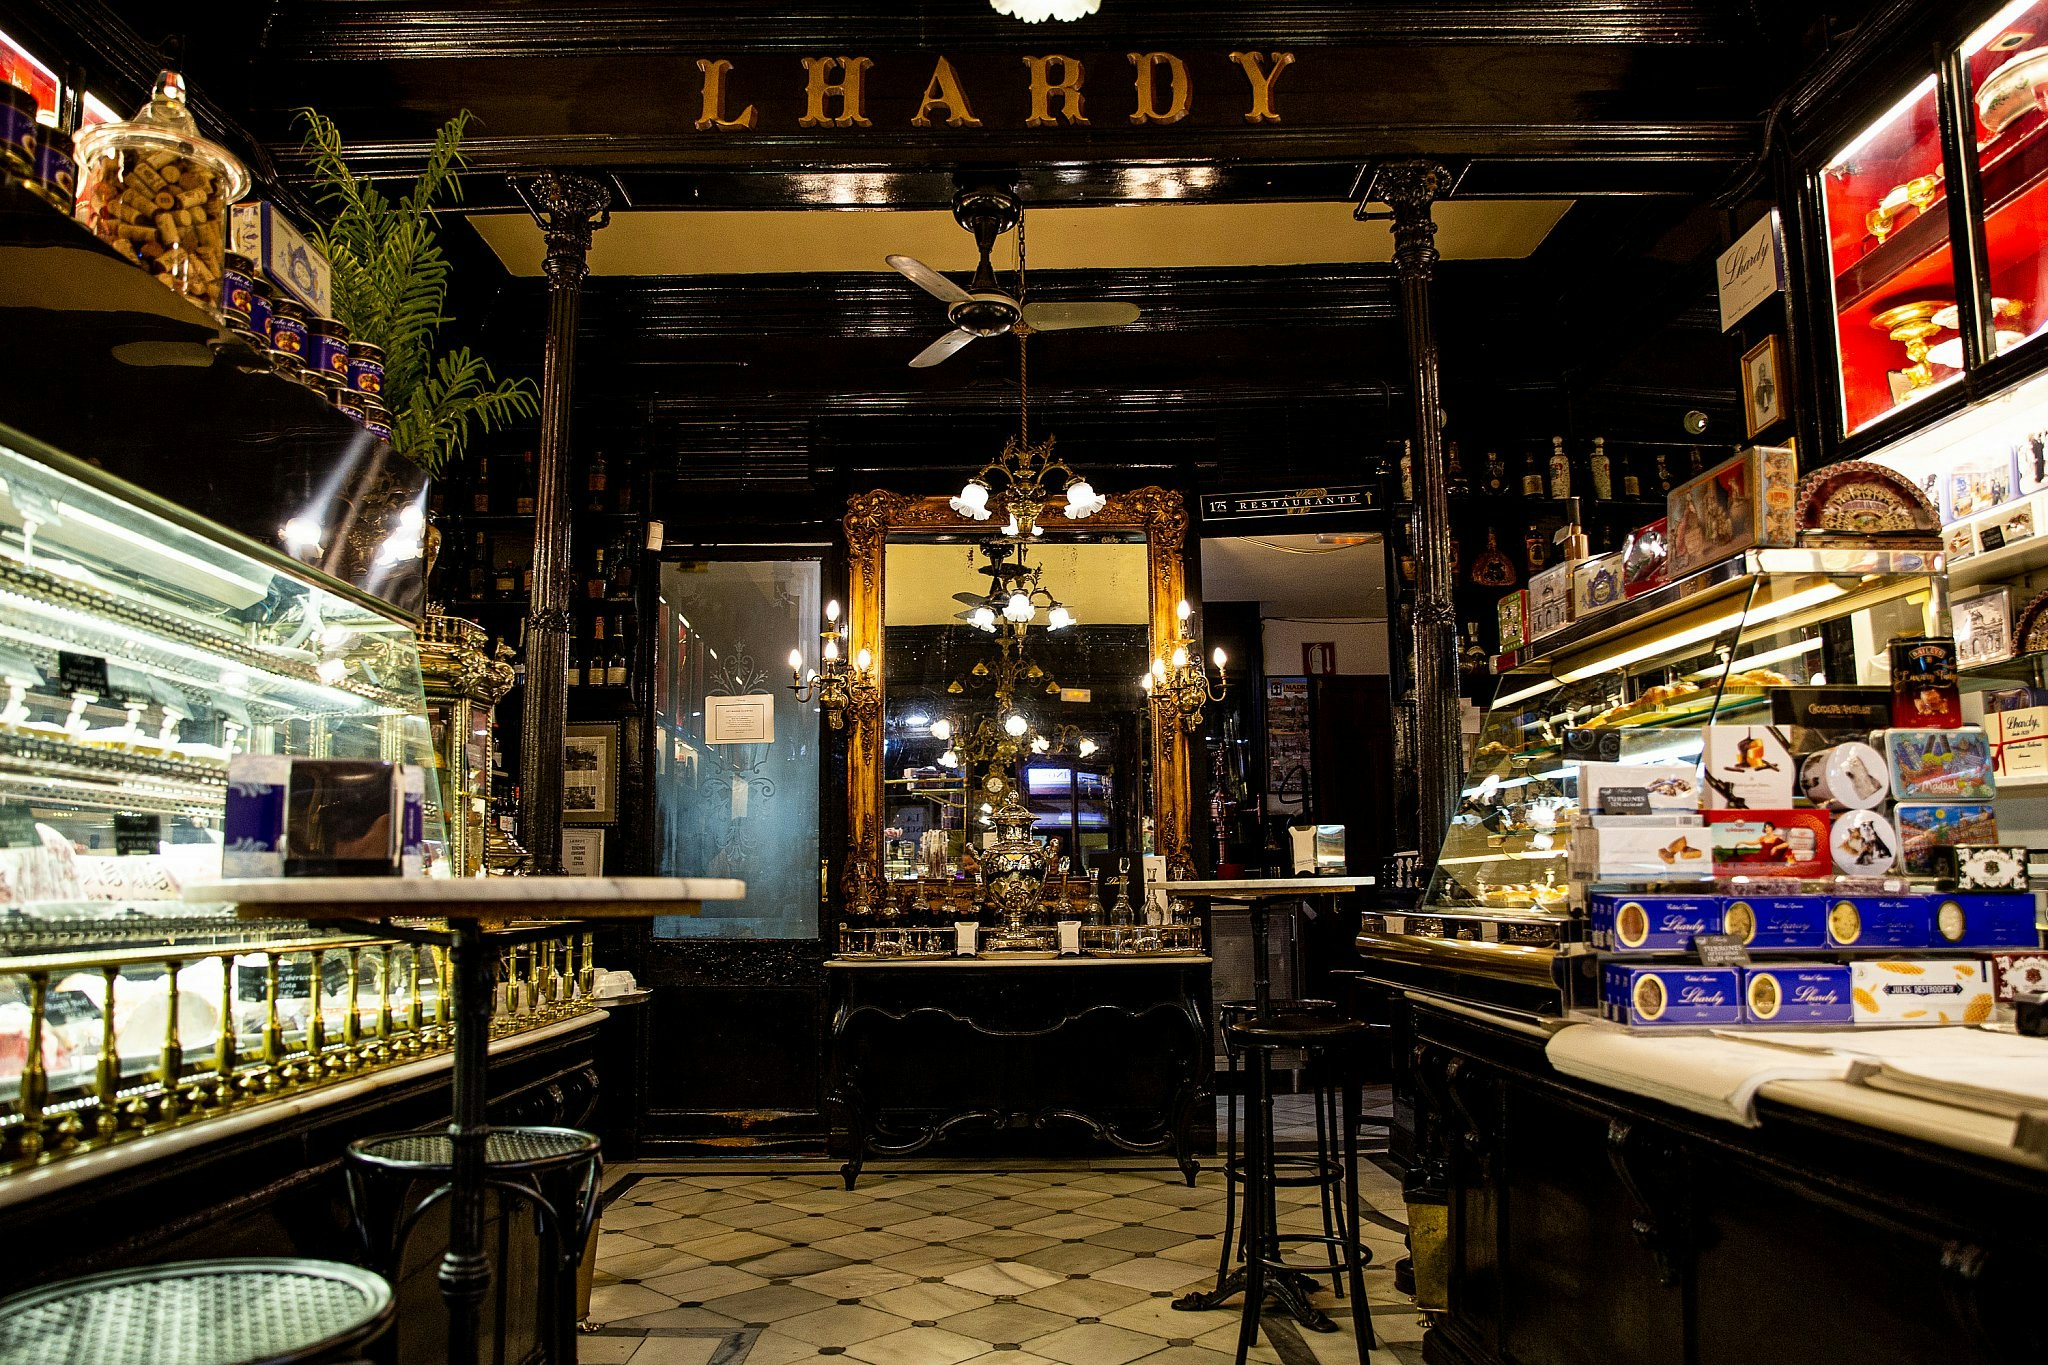 The opulent interior of Lhardy, with gilded fixtures, dark wood panelling and a white tiled floor.